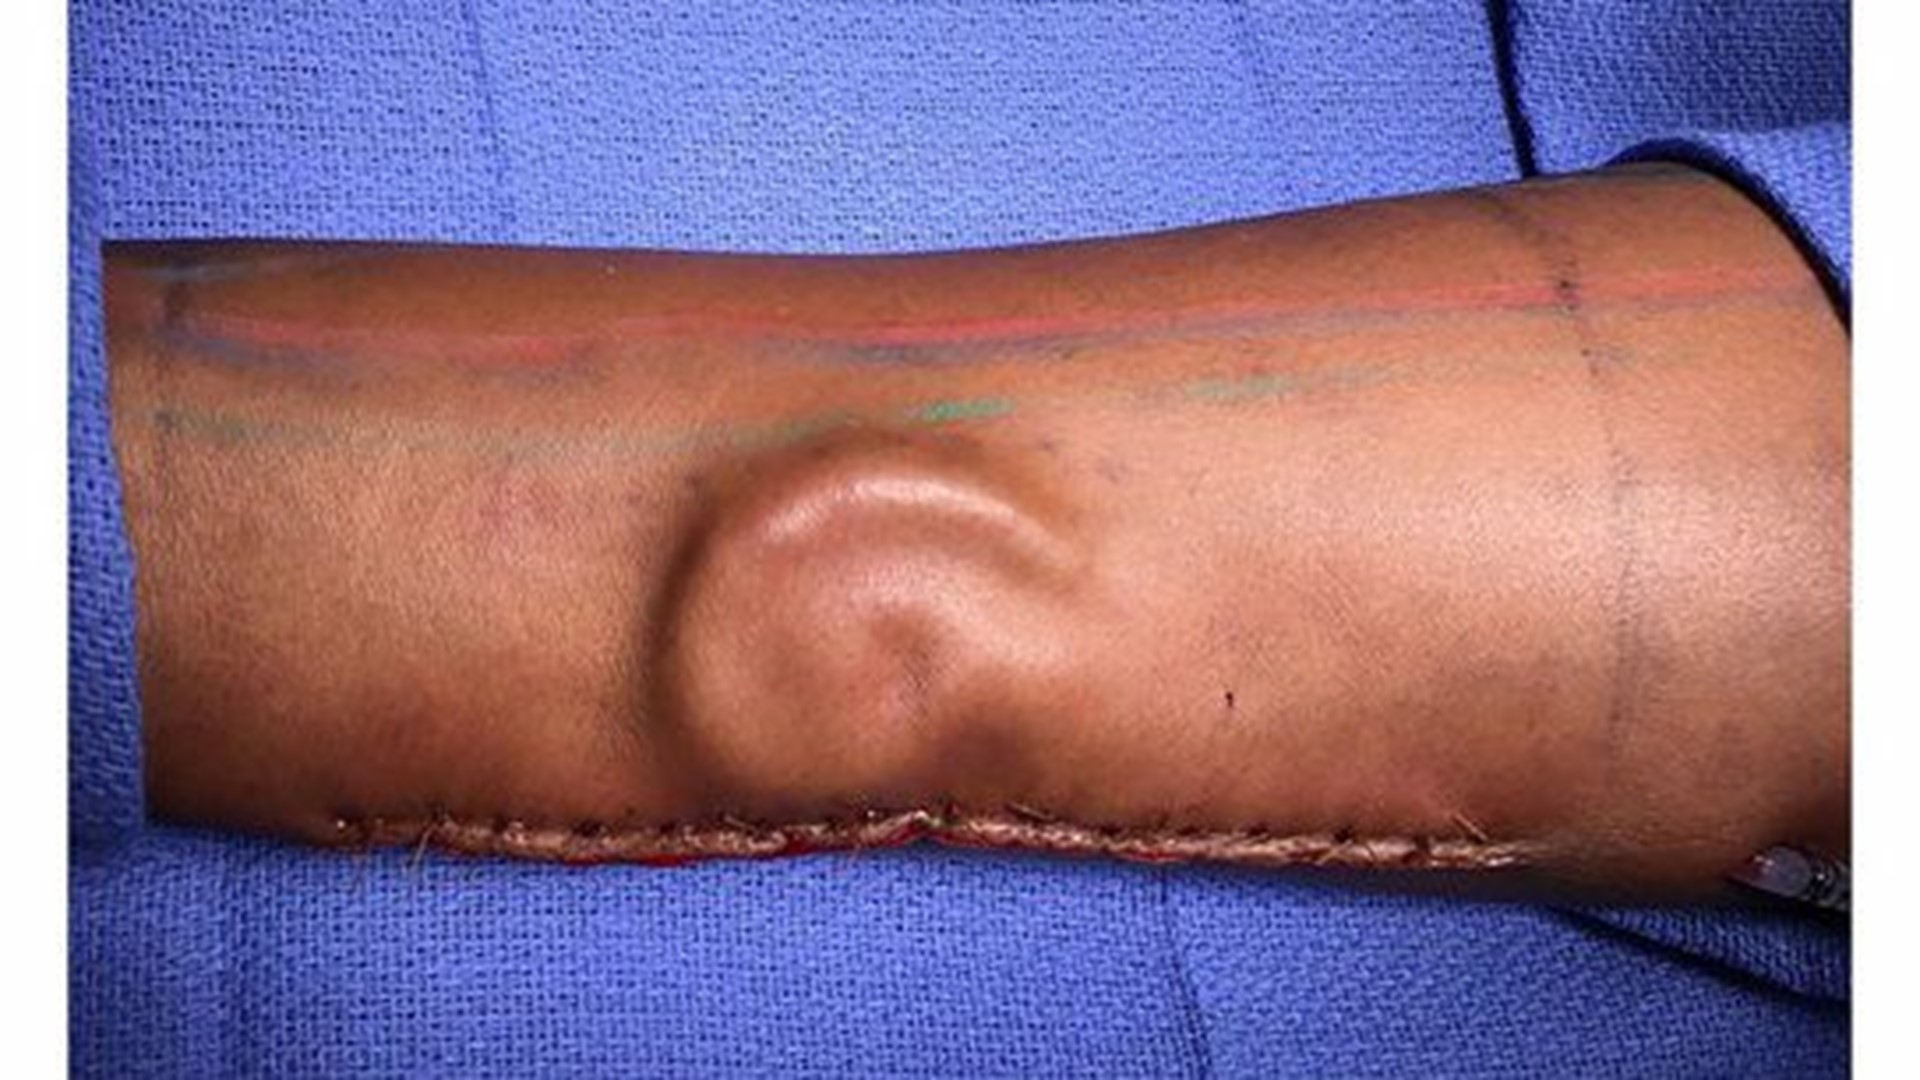 In what's being called a first of its kind surgery for the Army, doctors have successfully transplanted an ear 'grown' on a soldier's own forearm.